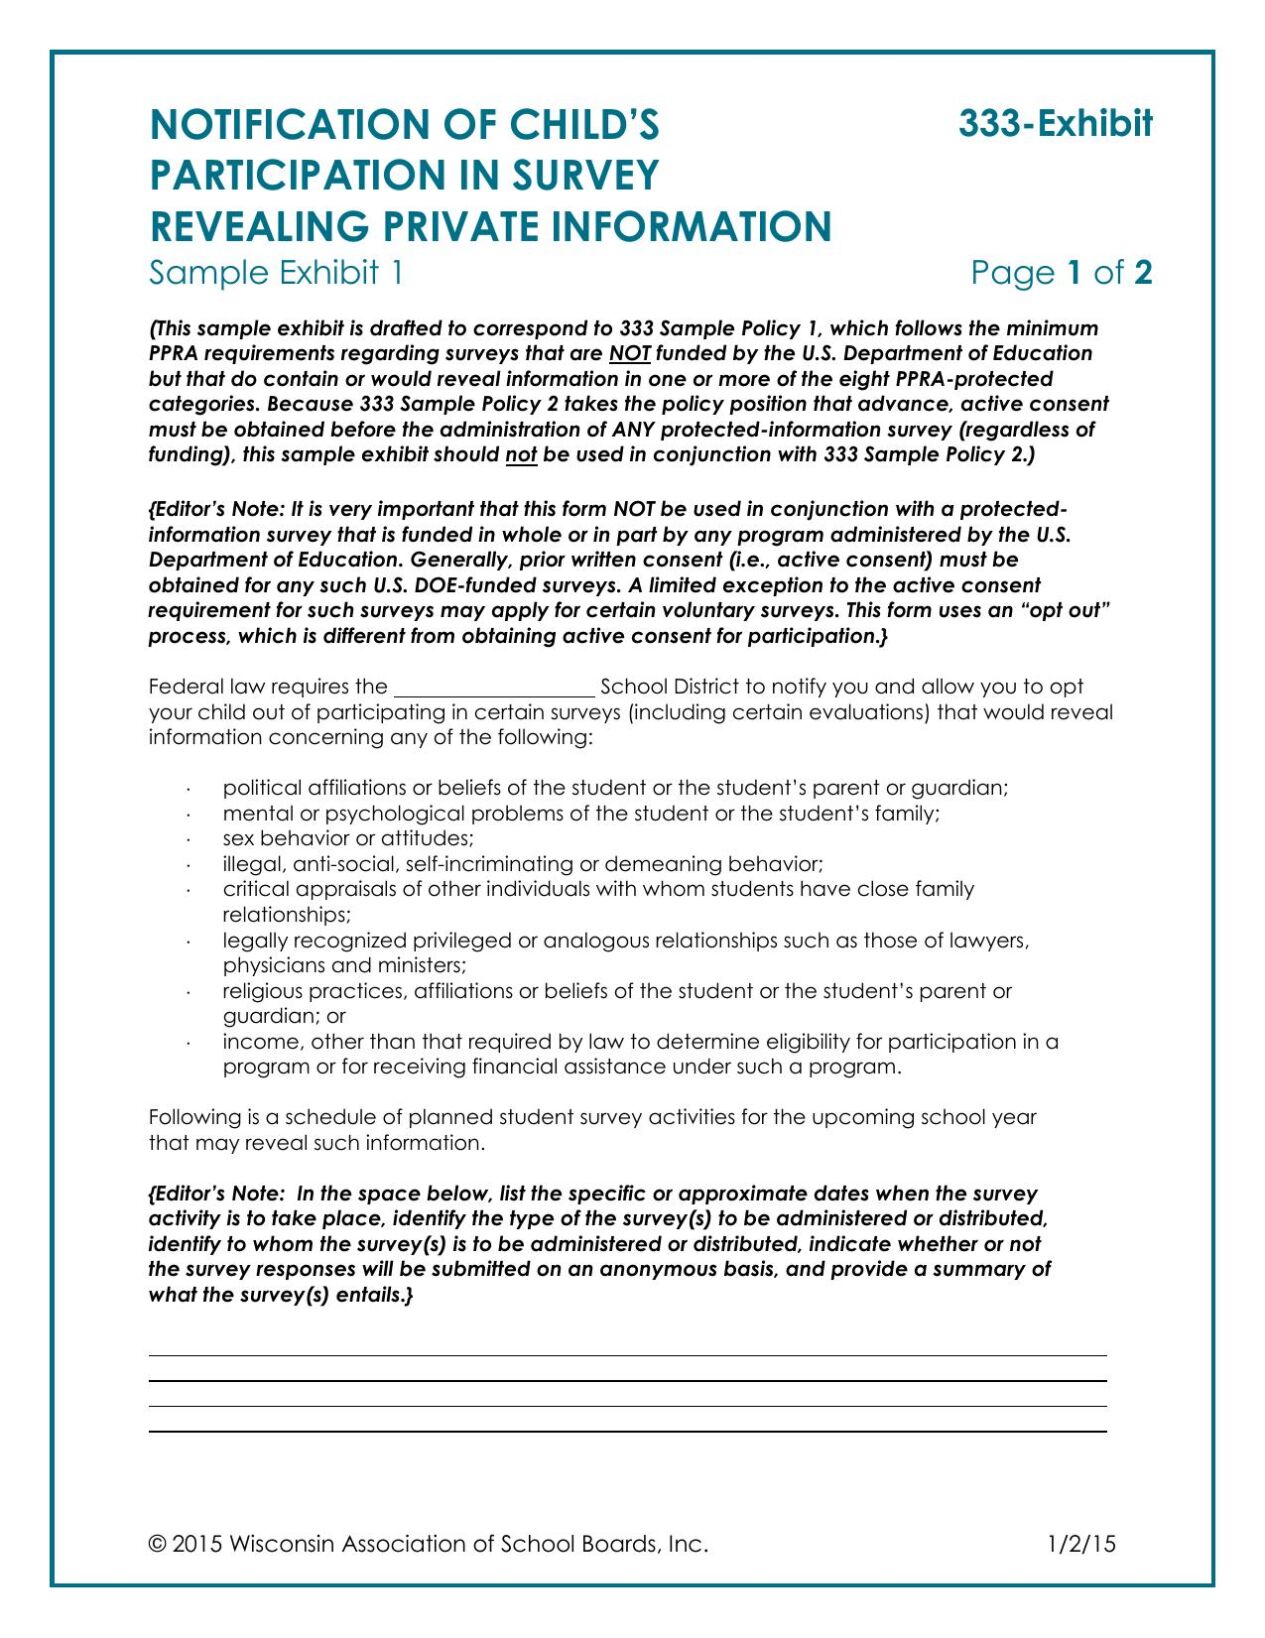 Notification of a Child's Participation in Survey Revealing Private Information